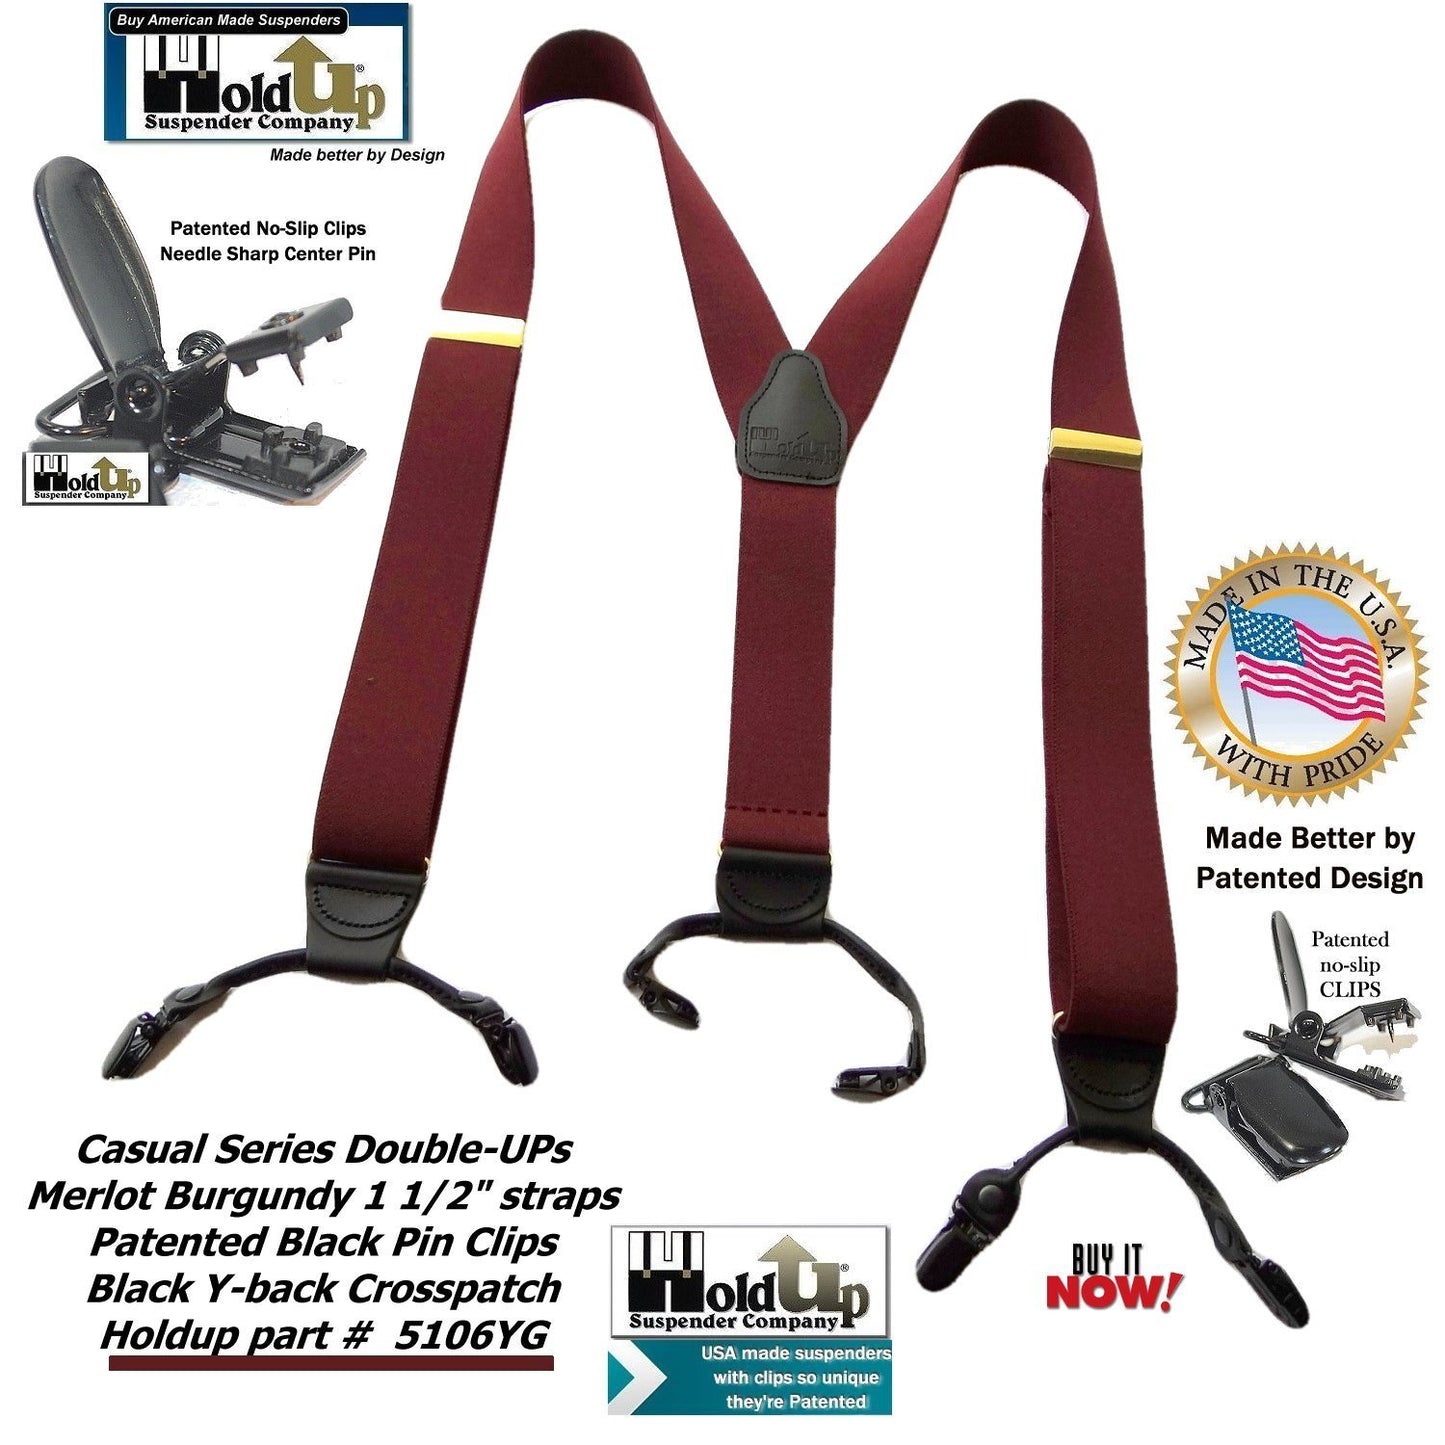 Holdup Suspender Company's Merlot Burgundy Double-Up style Suspenders with black Patented No-slip Clips.